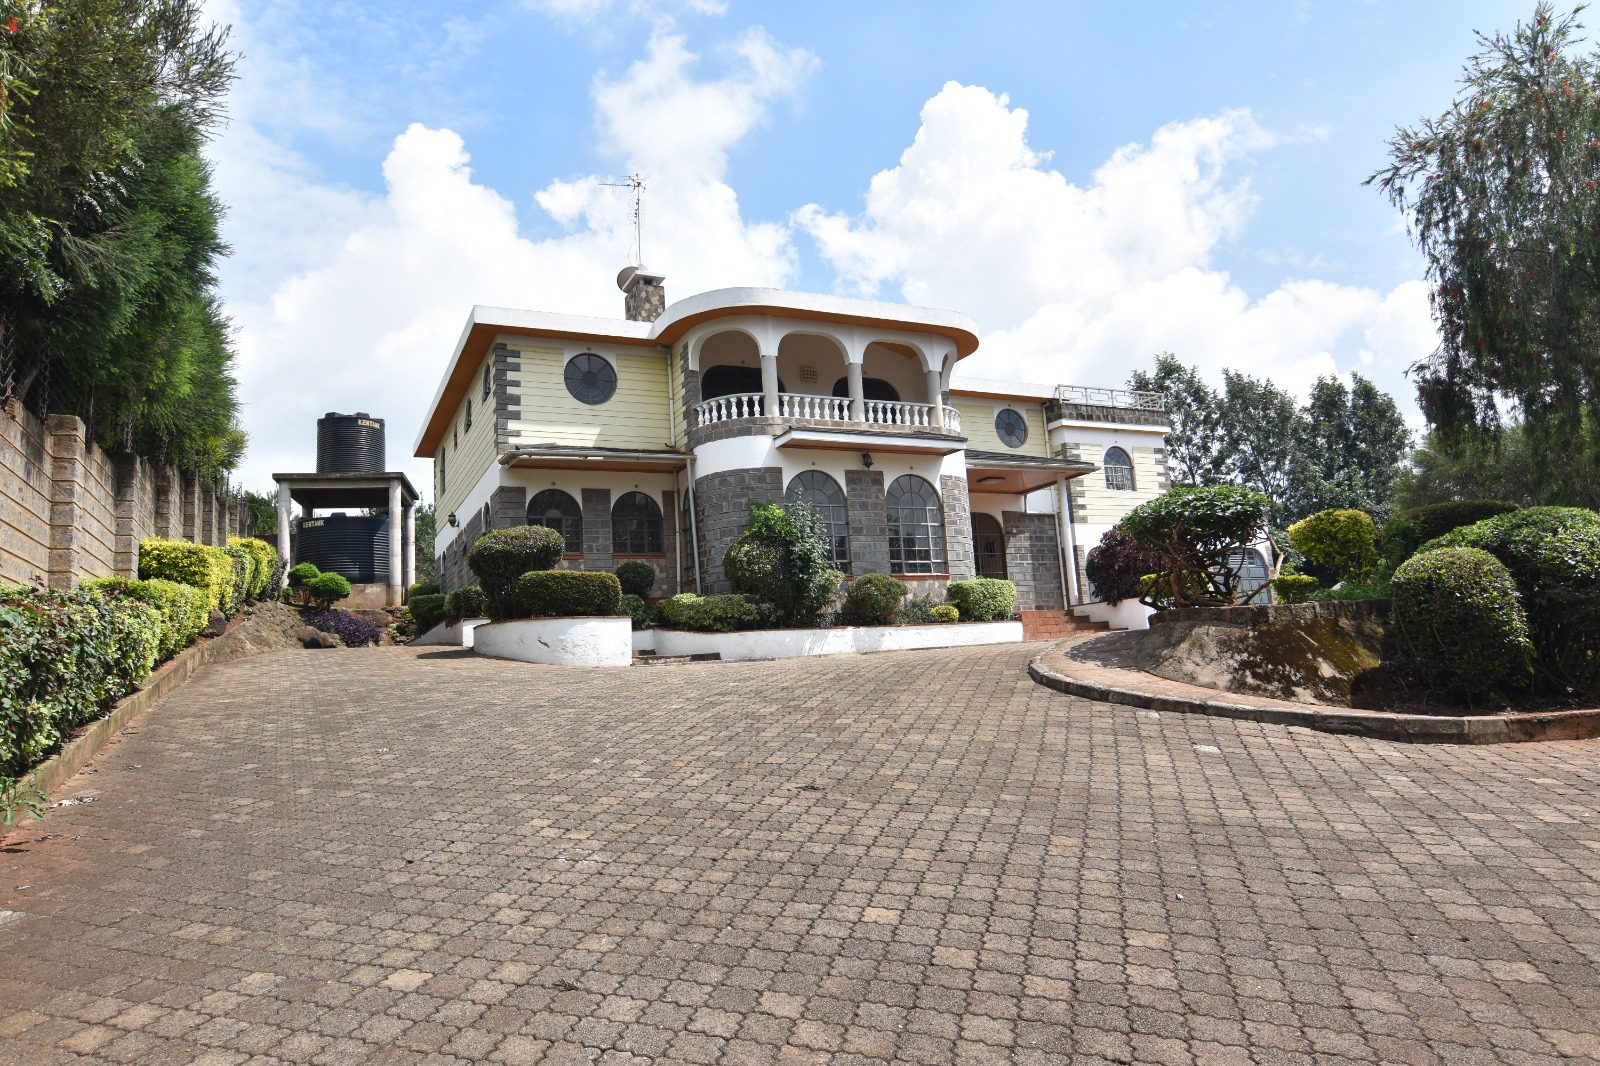 Spacious 7 Bedroom Mansion To Let in Ngong. Has a laundry area, store, cloakroom, DSQ, store, and gate house. Asking Price: 95 M. Musilli Homes.